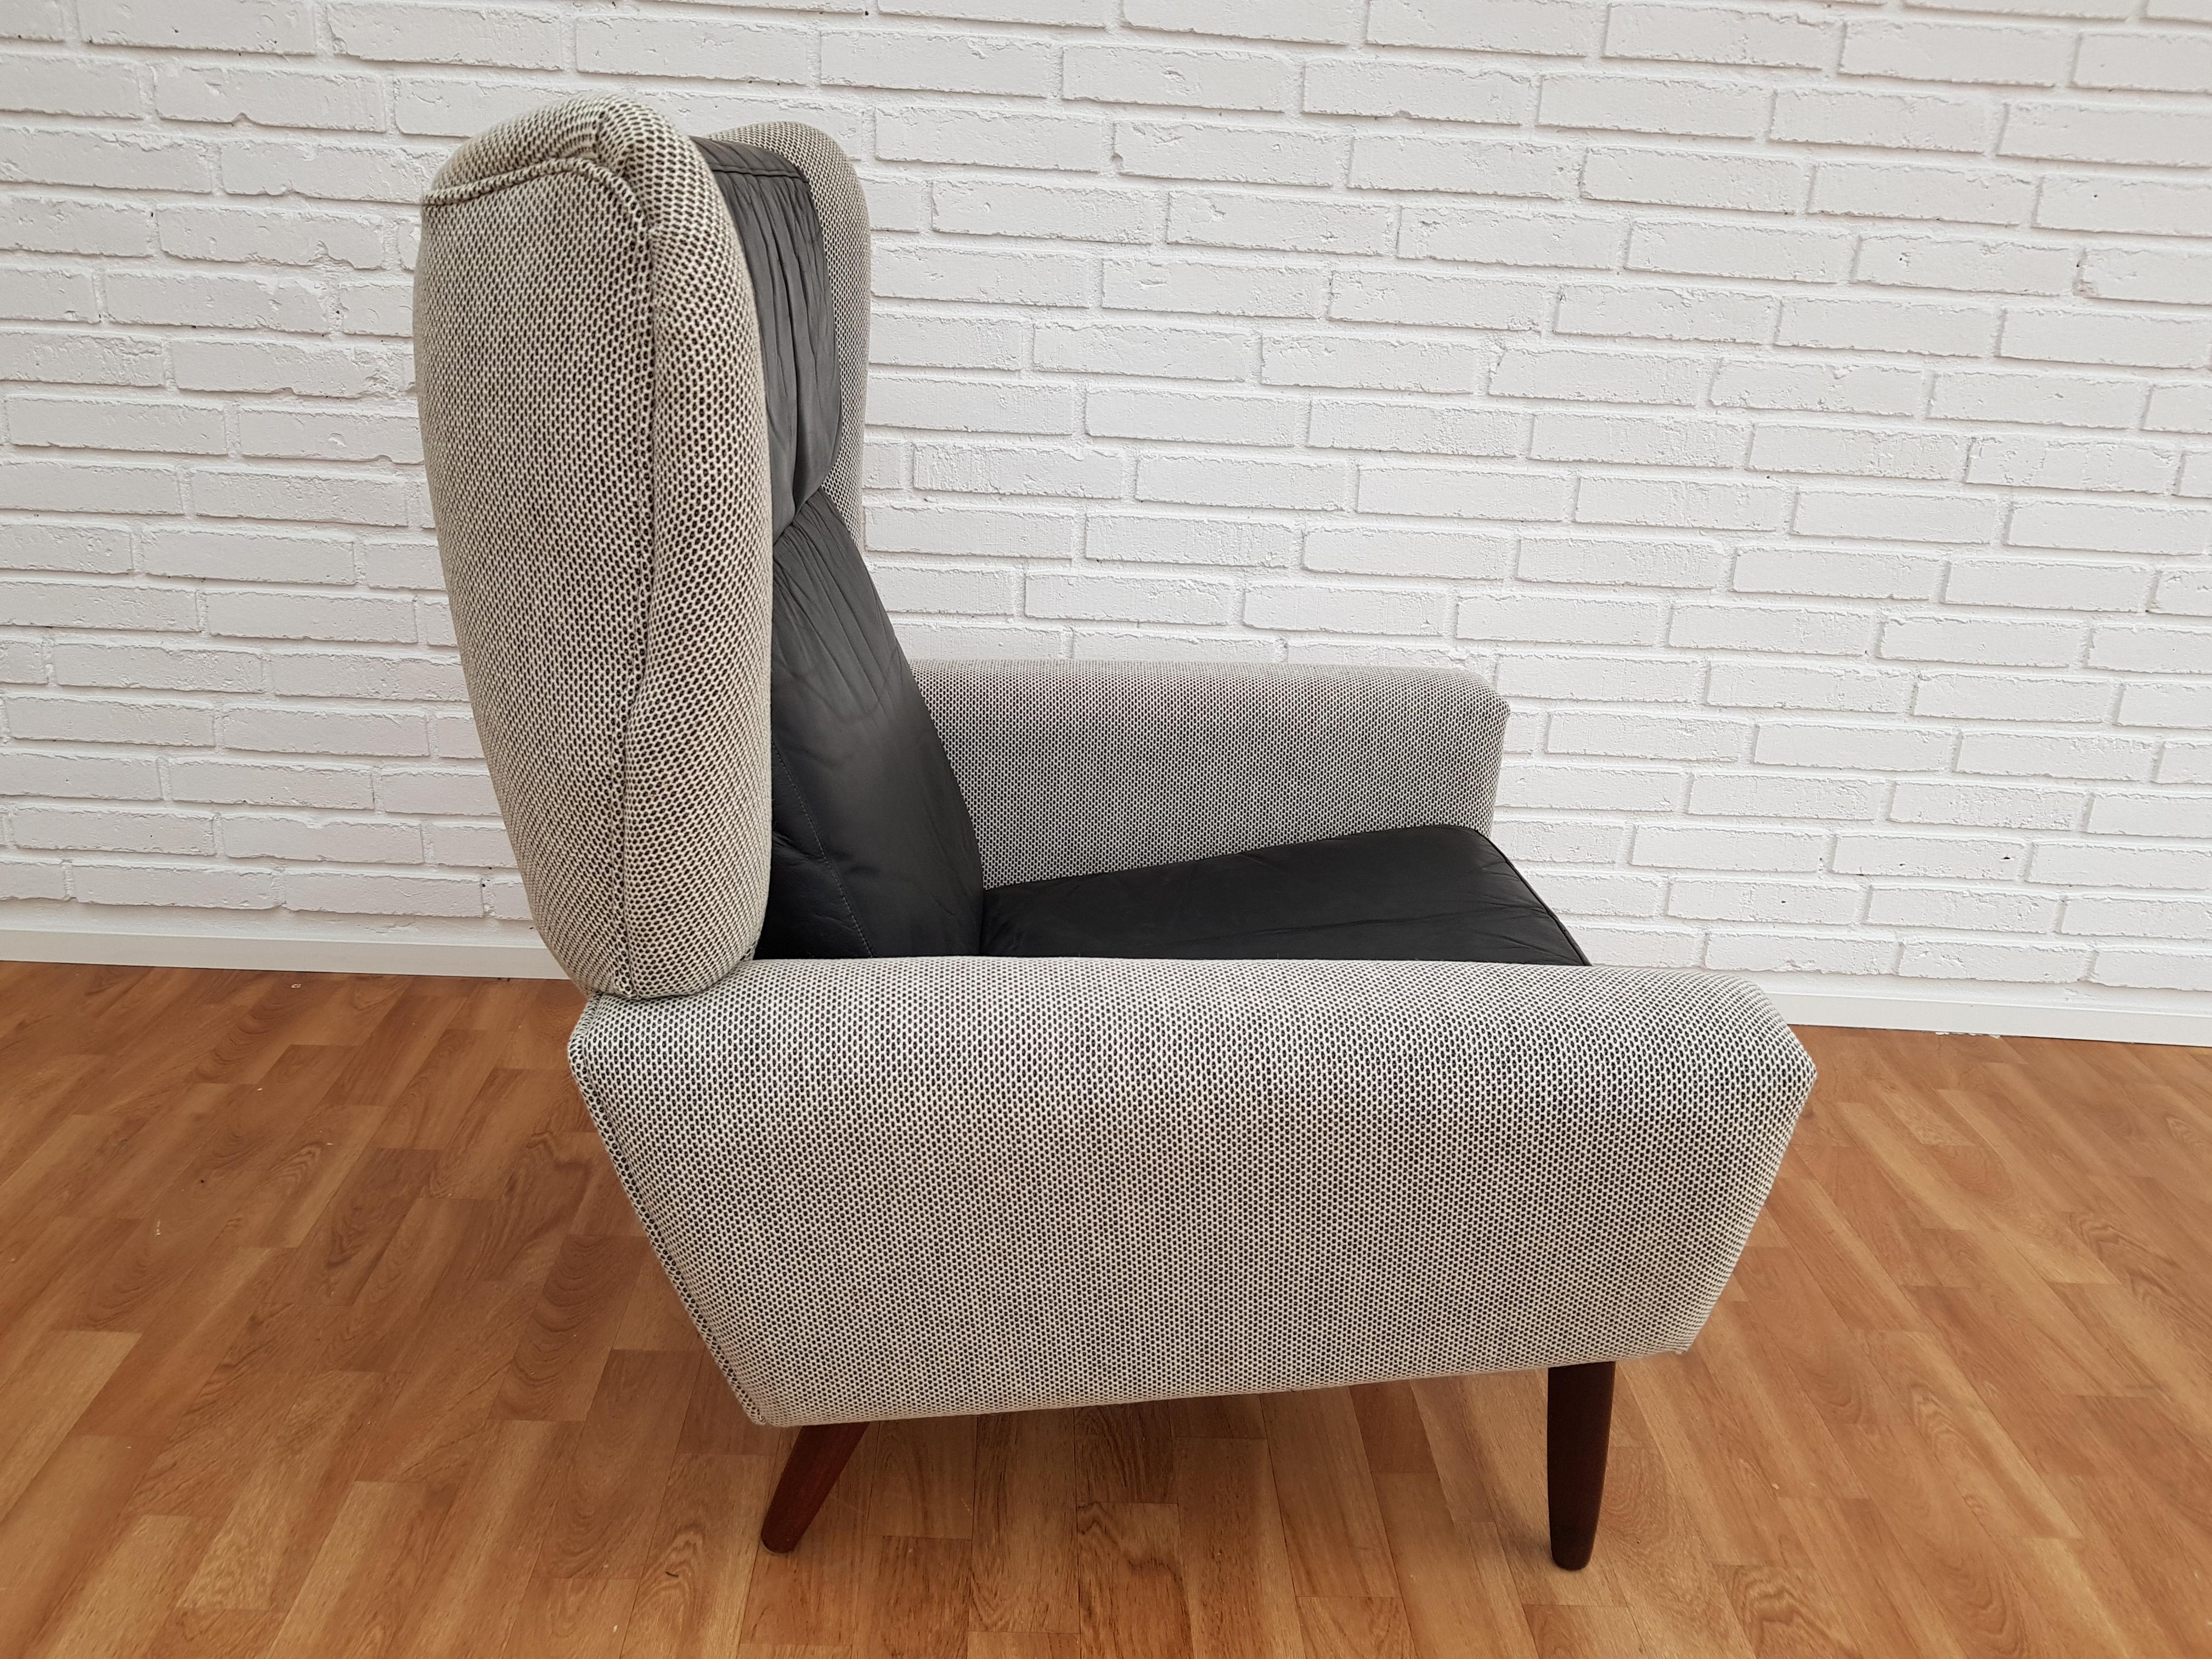 A unique cool armchair with loose cushions. Made in circa 1970 by Danish furniture manufacturer. Teakwood legs. Completely renovated by craftsman, furniture upholsterer at Retro Møbler Galleri. New reupholstered in quality light gray or white wool